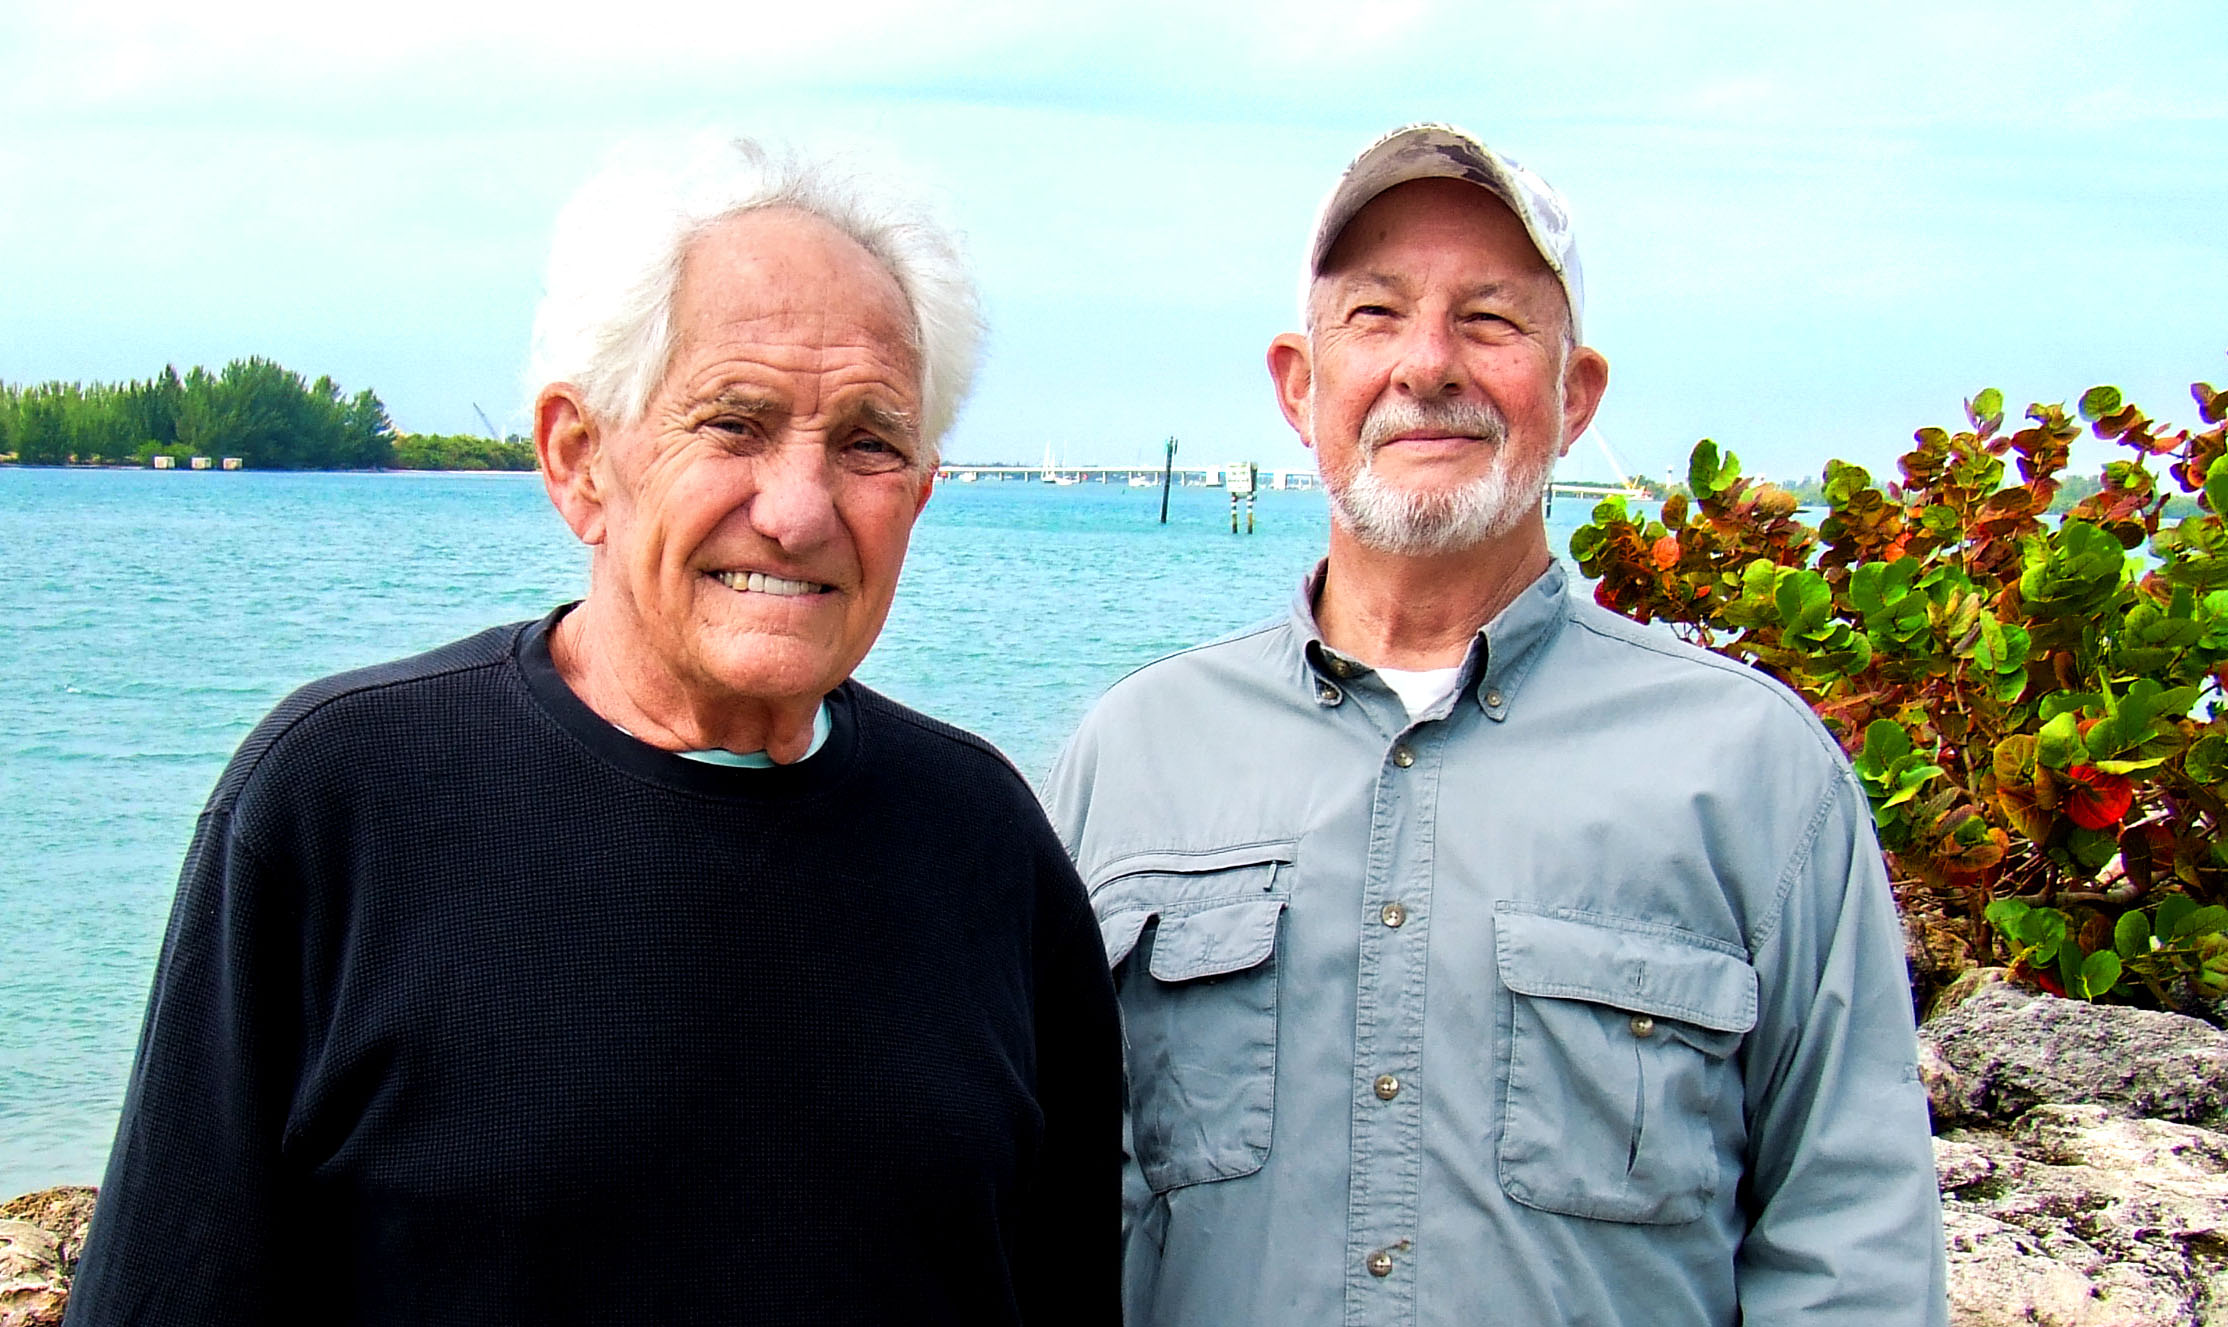 Fort Pierce commercial fisherman, Capt. Terry Howard, fishes solo most days.